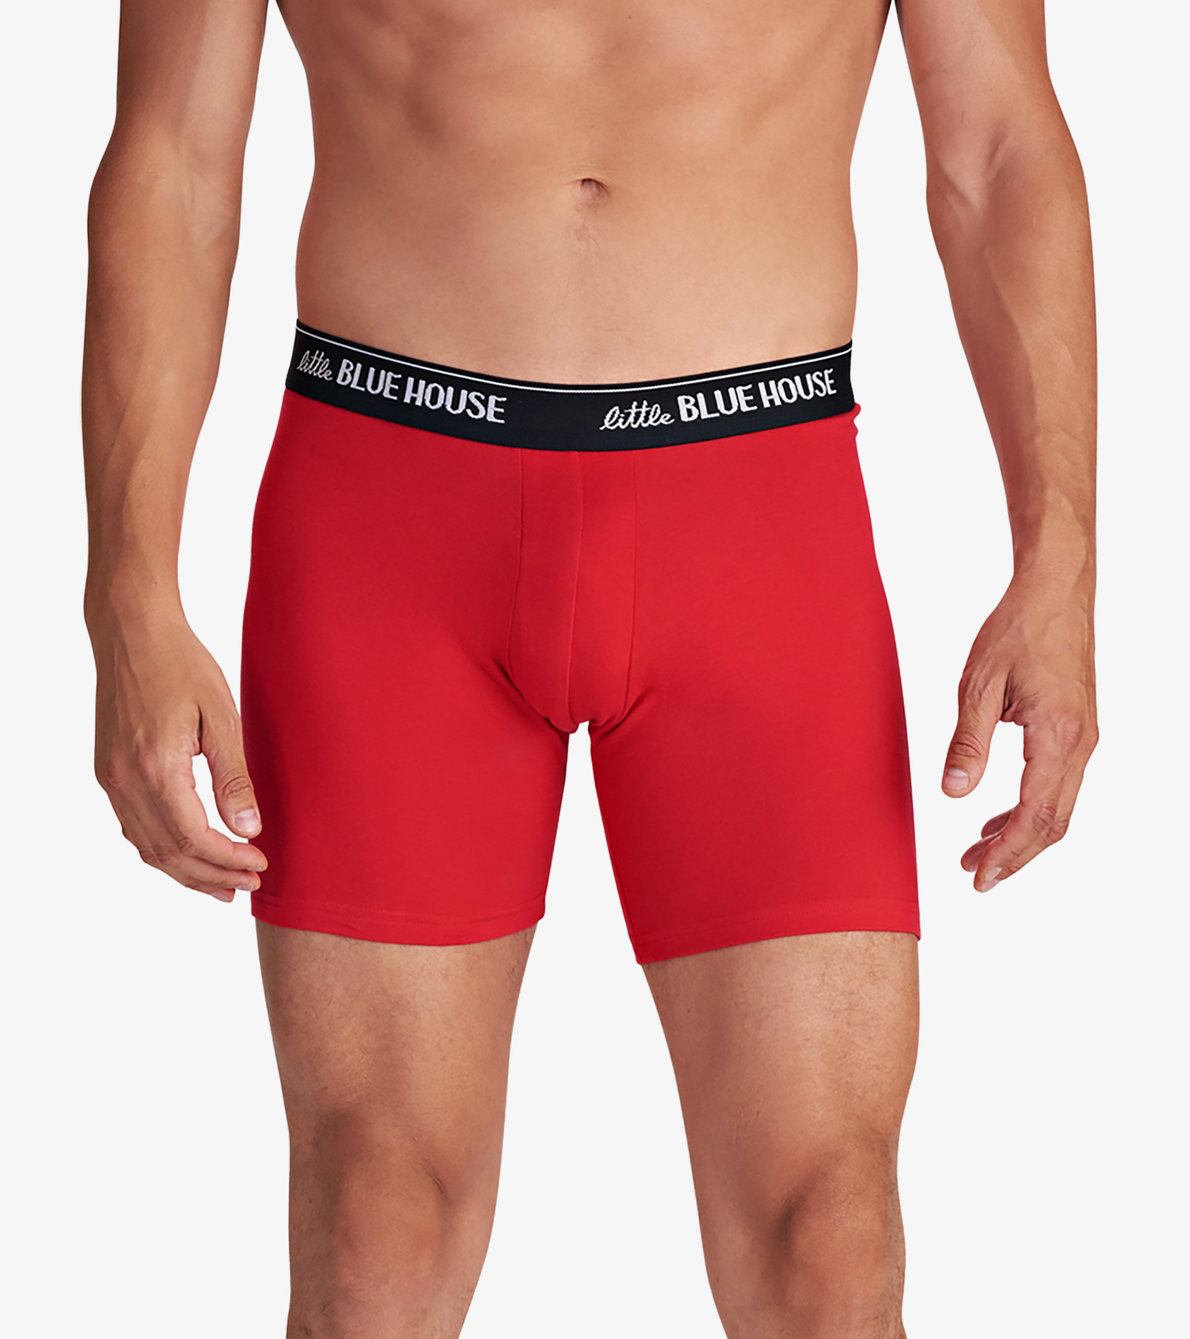 View larger image of Lager Than life Men's Boxer Briefs